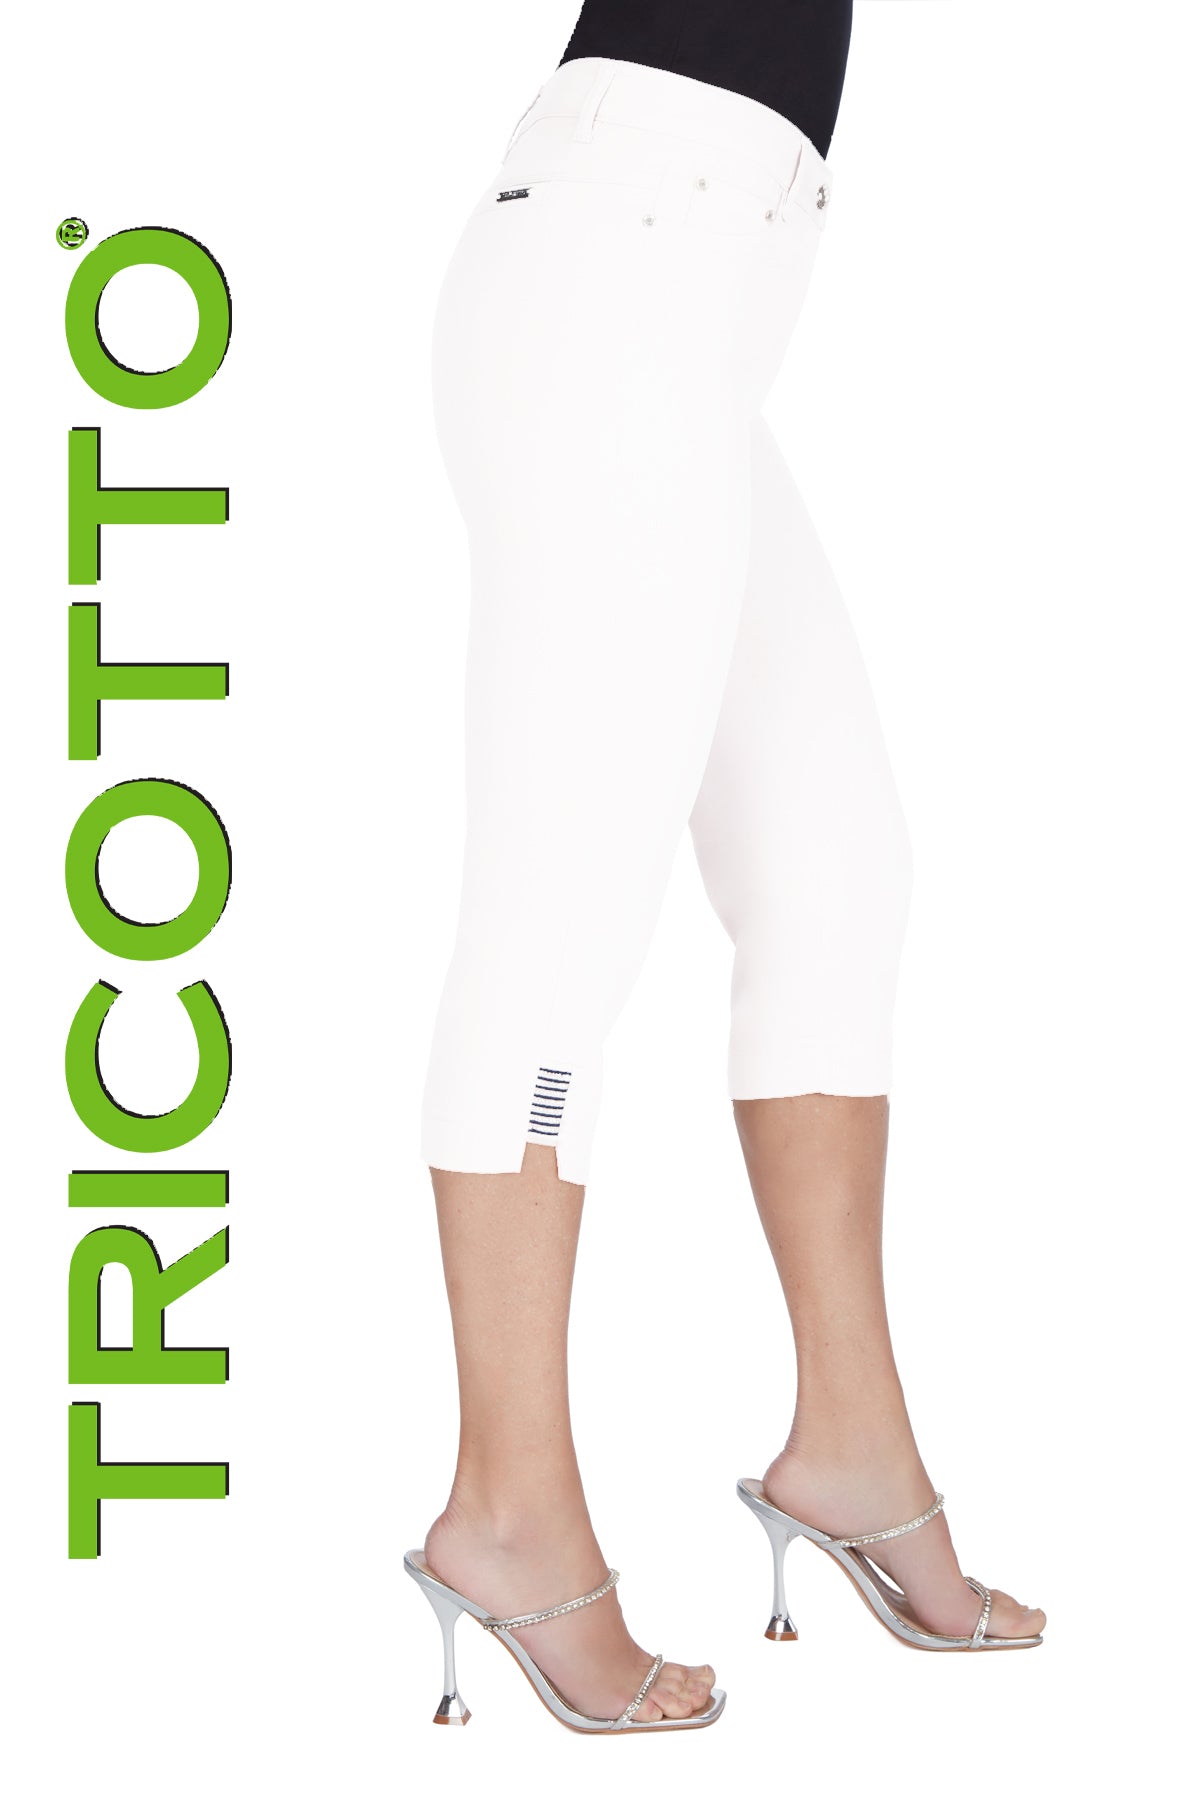 Tricotto Jeans-Buy Tricotto Jeans Online-Tricotto Spring 2022 Collection-Tricotto Clothing Quebec-Tricotto Clothing Montreal -Jane & John Clothing